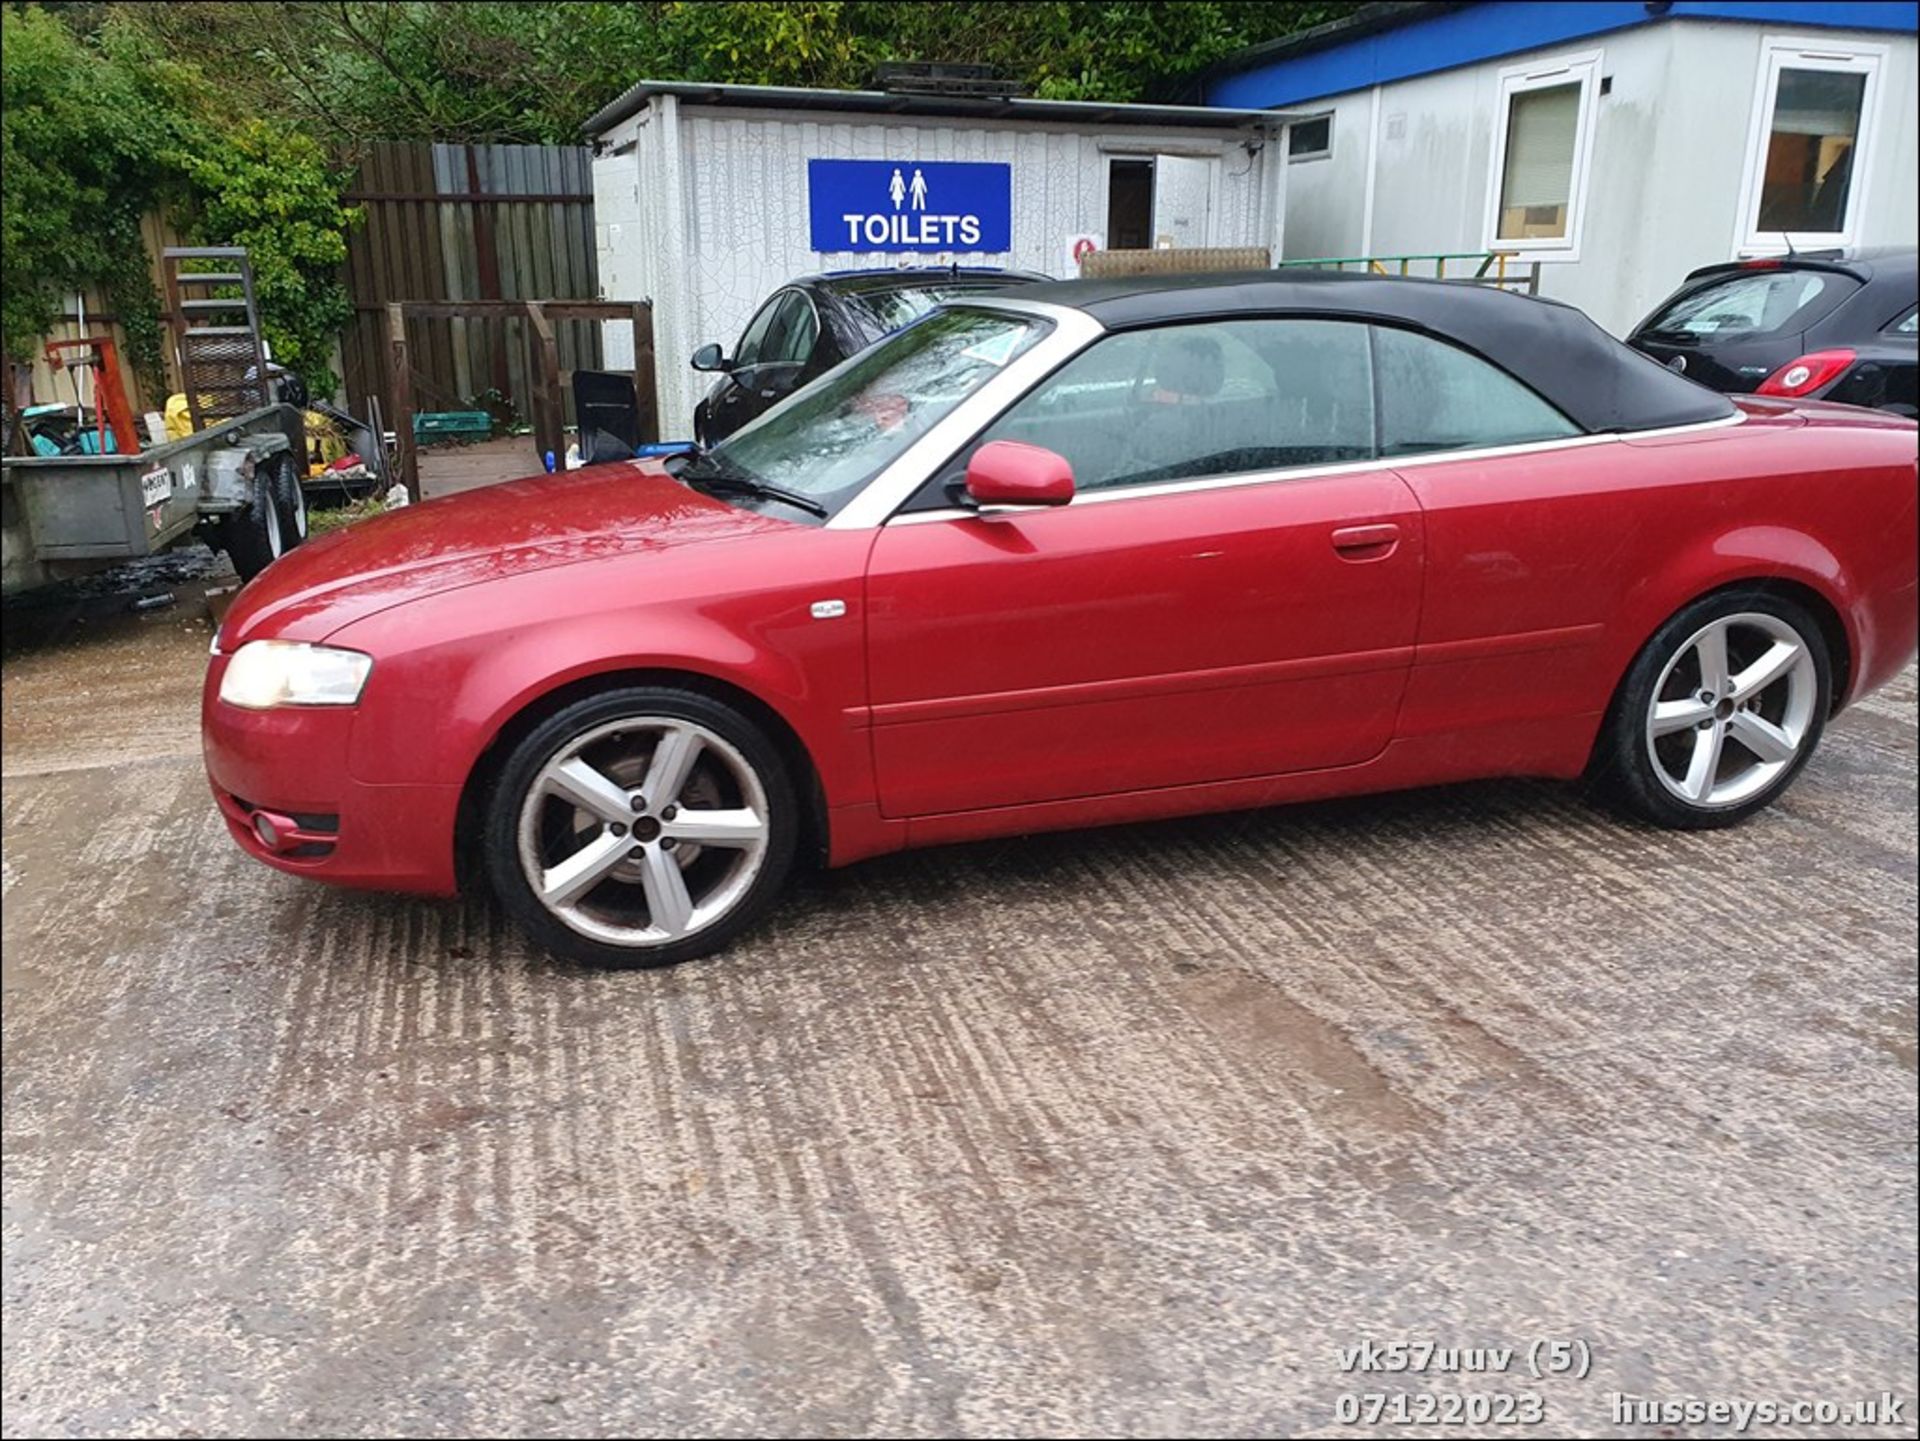 07/57 AUDI A4 SPORT CABRIOLET TDI A - 1986cc 2dr Convertible (Red, 151k) - Image 6 of 25